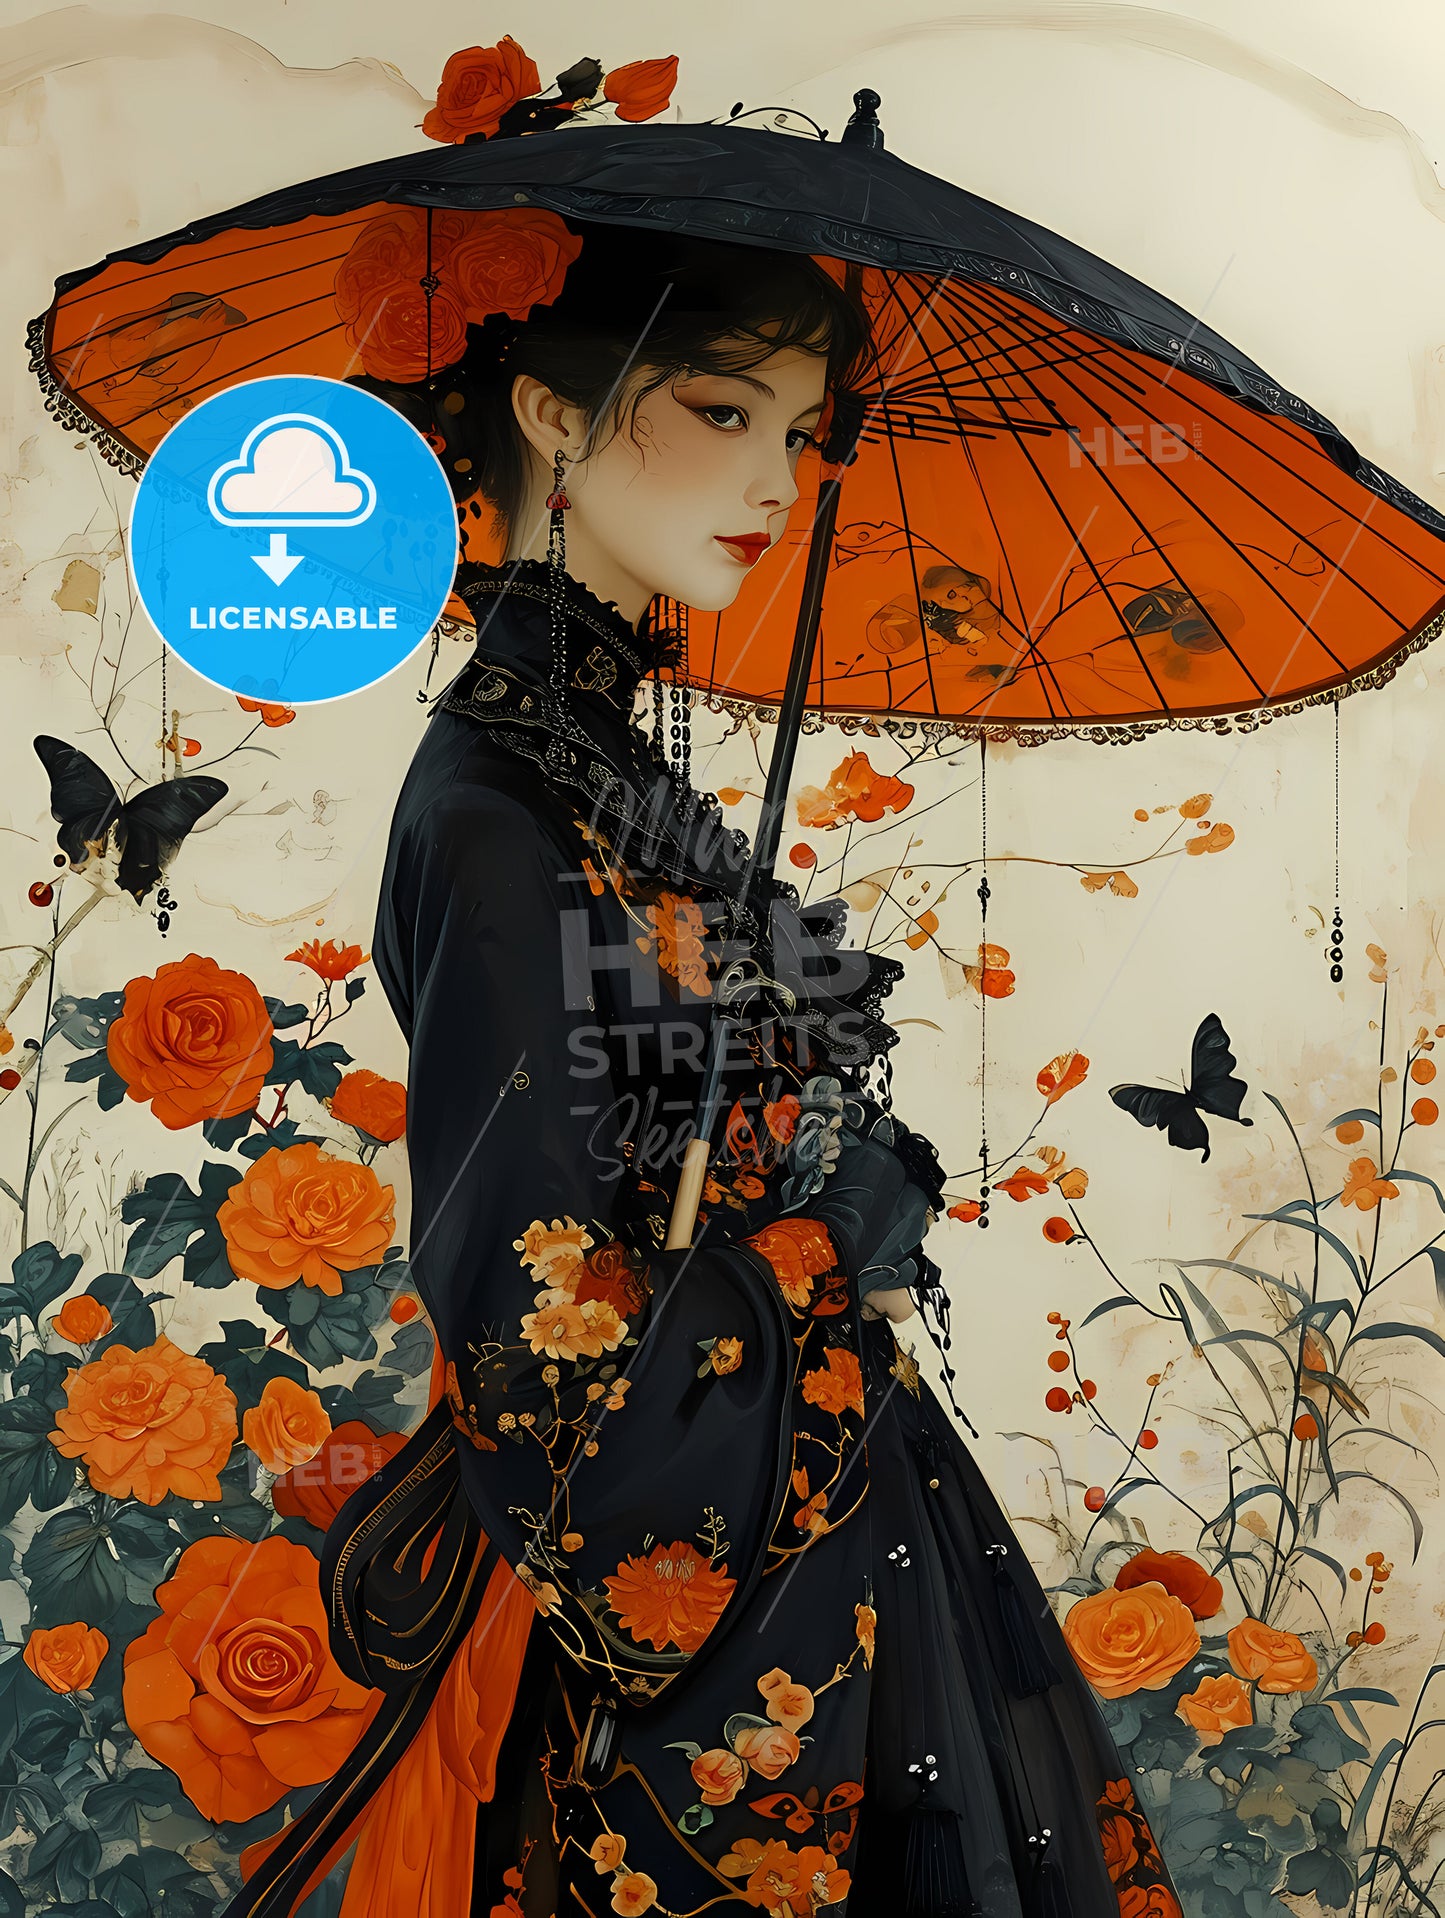 Vintage Cut-Out-And-Keep Fashion, A Woman With An Umbrella